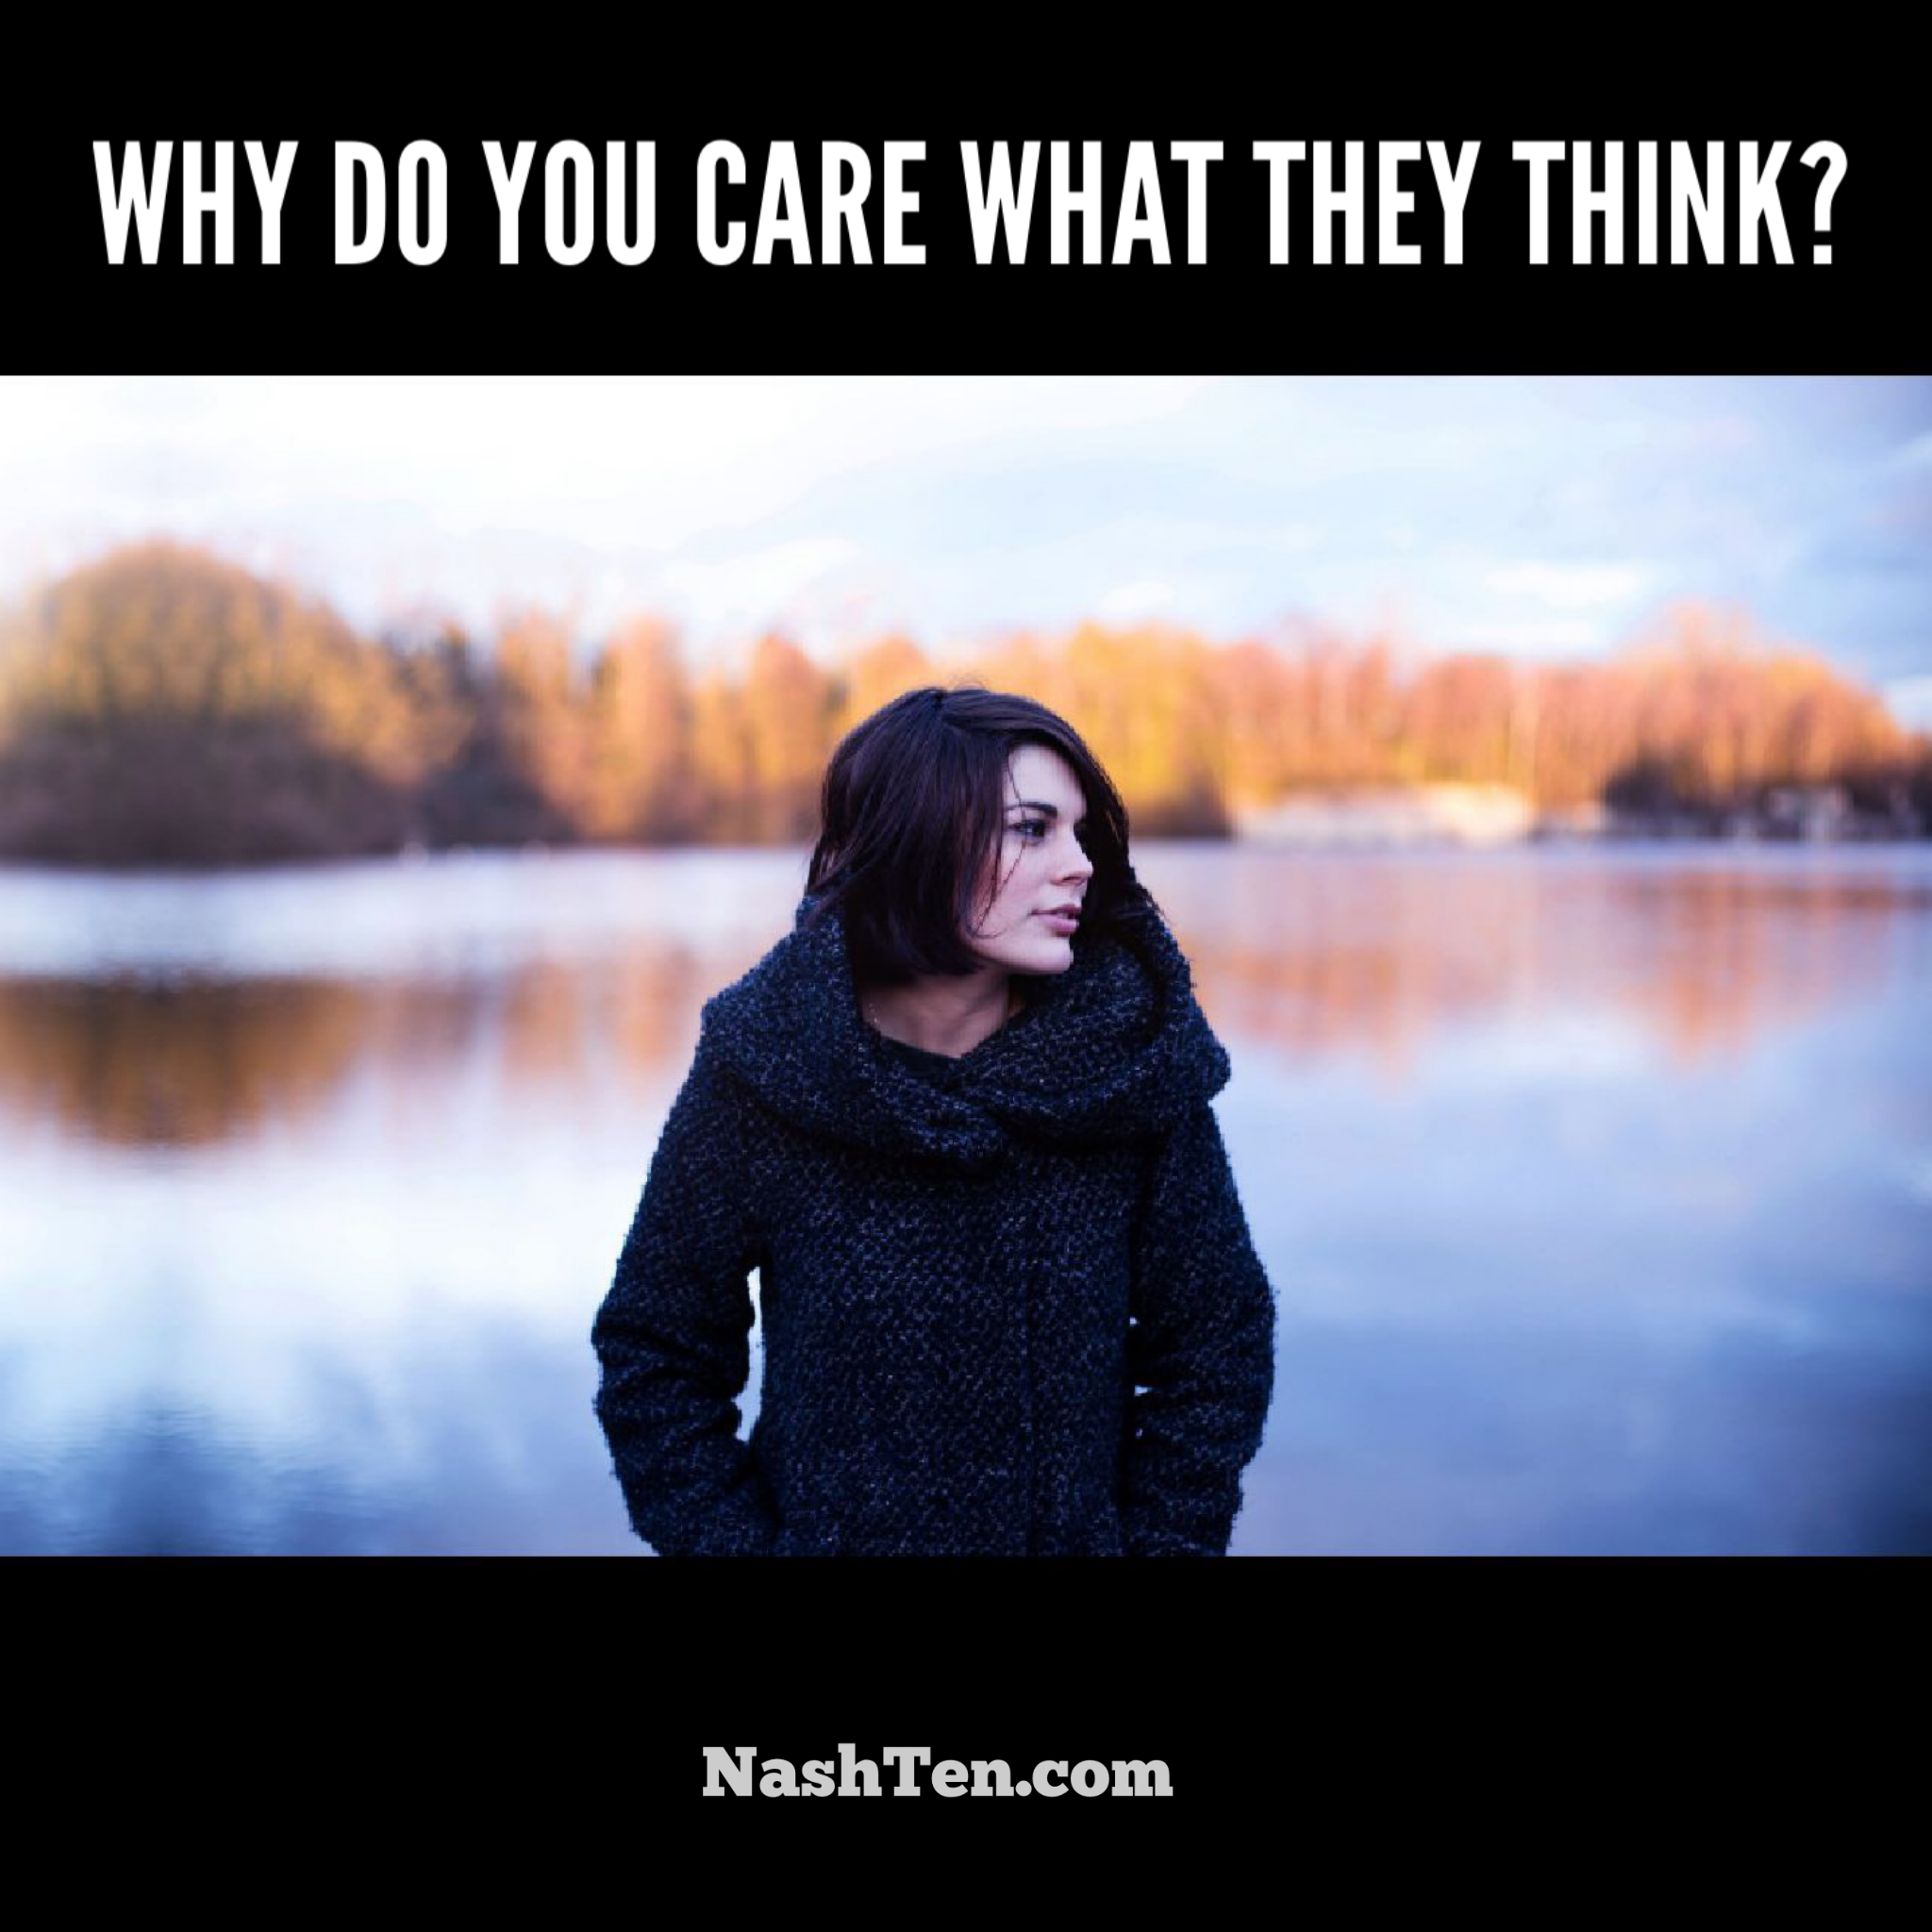 Why do you care what they think?